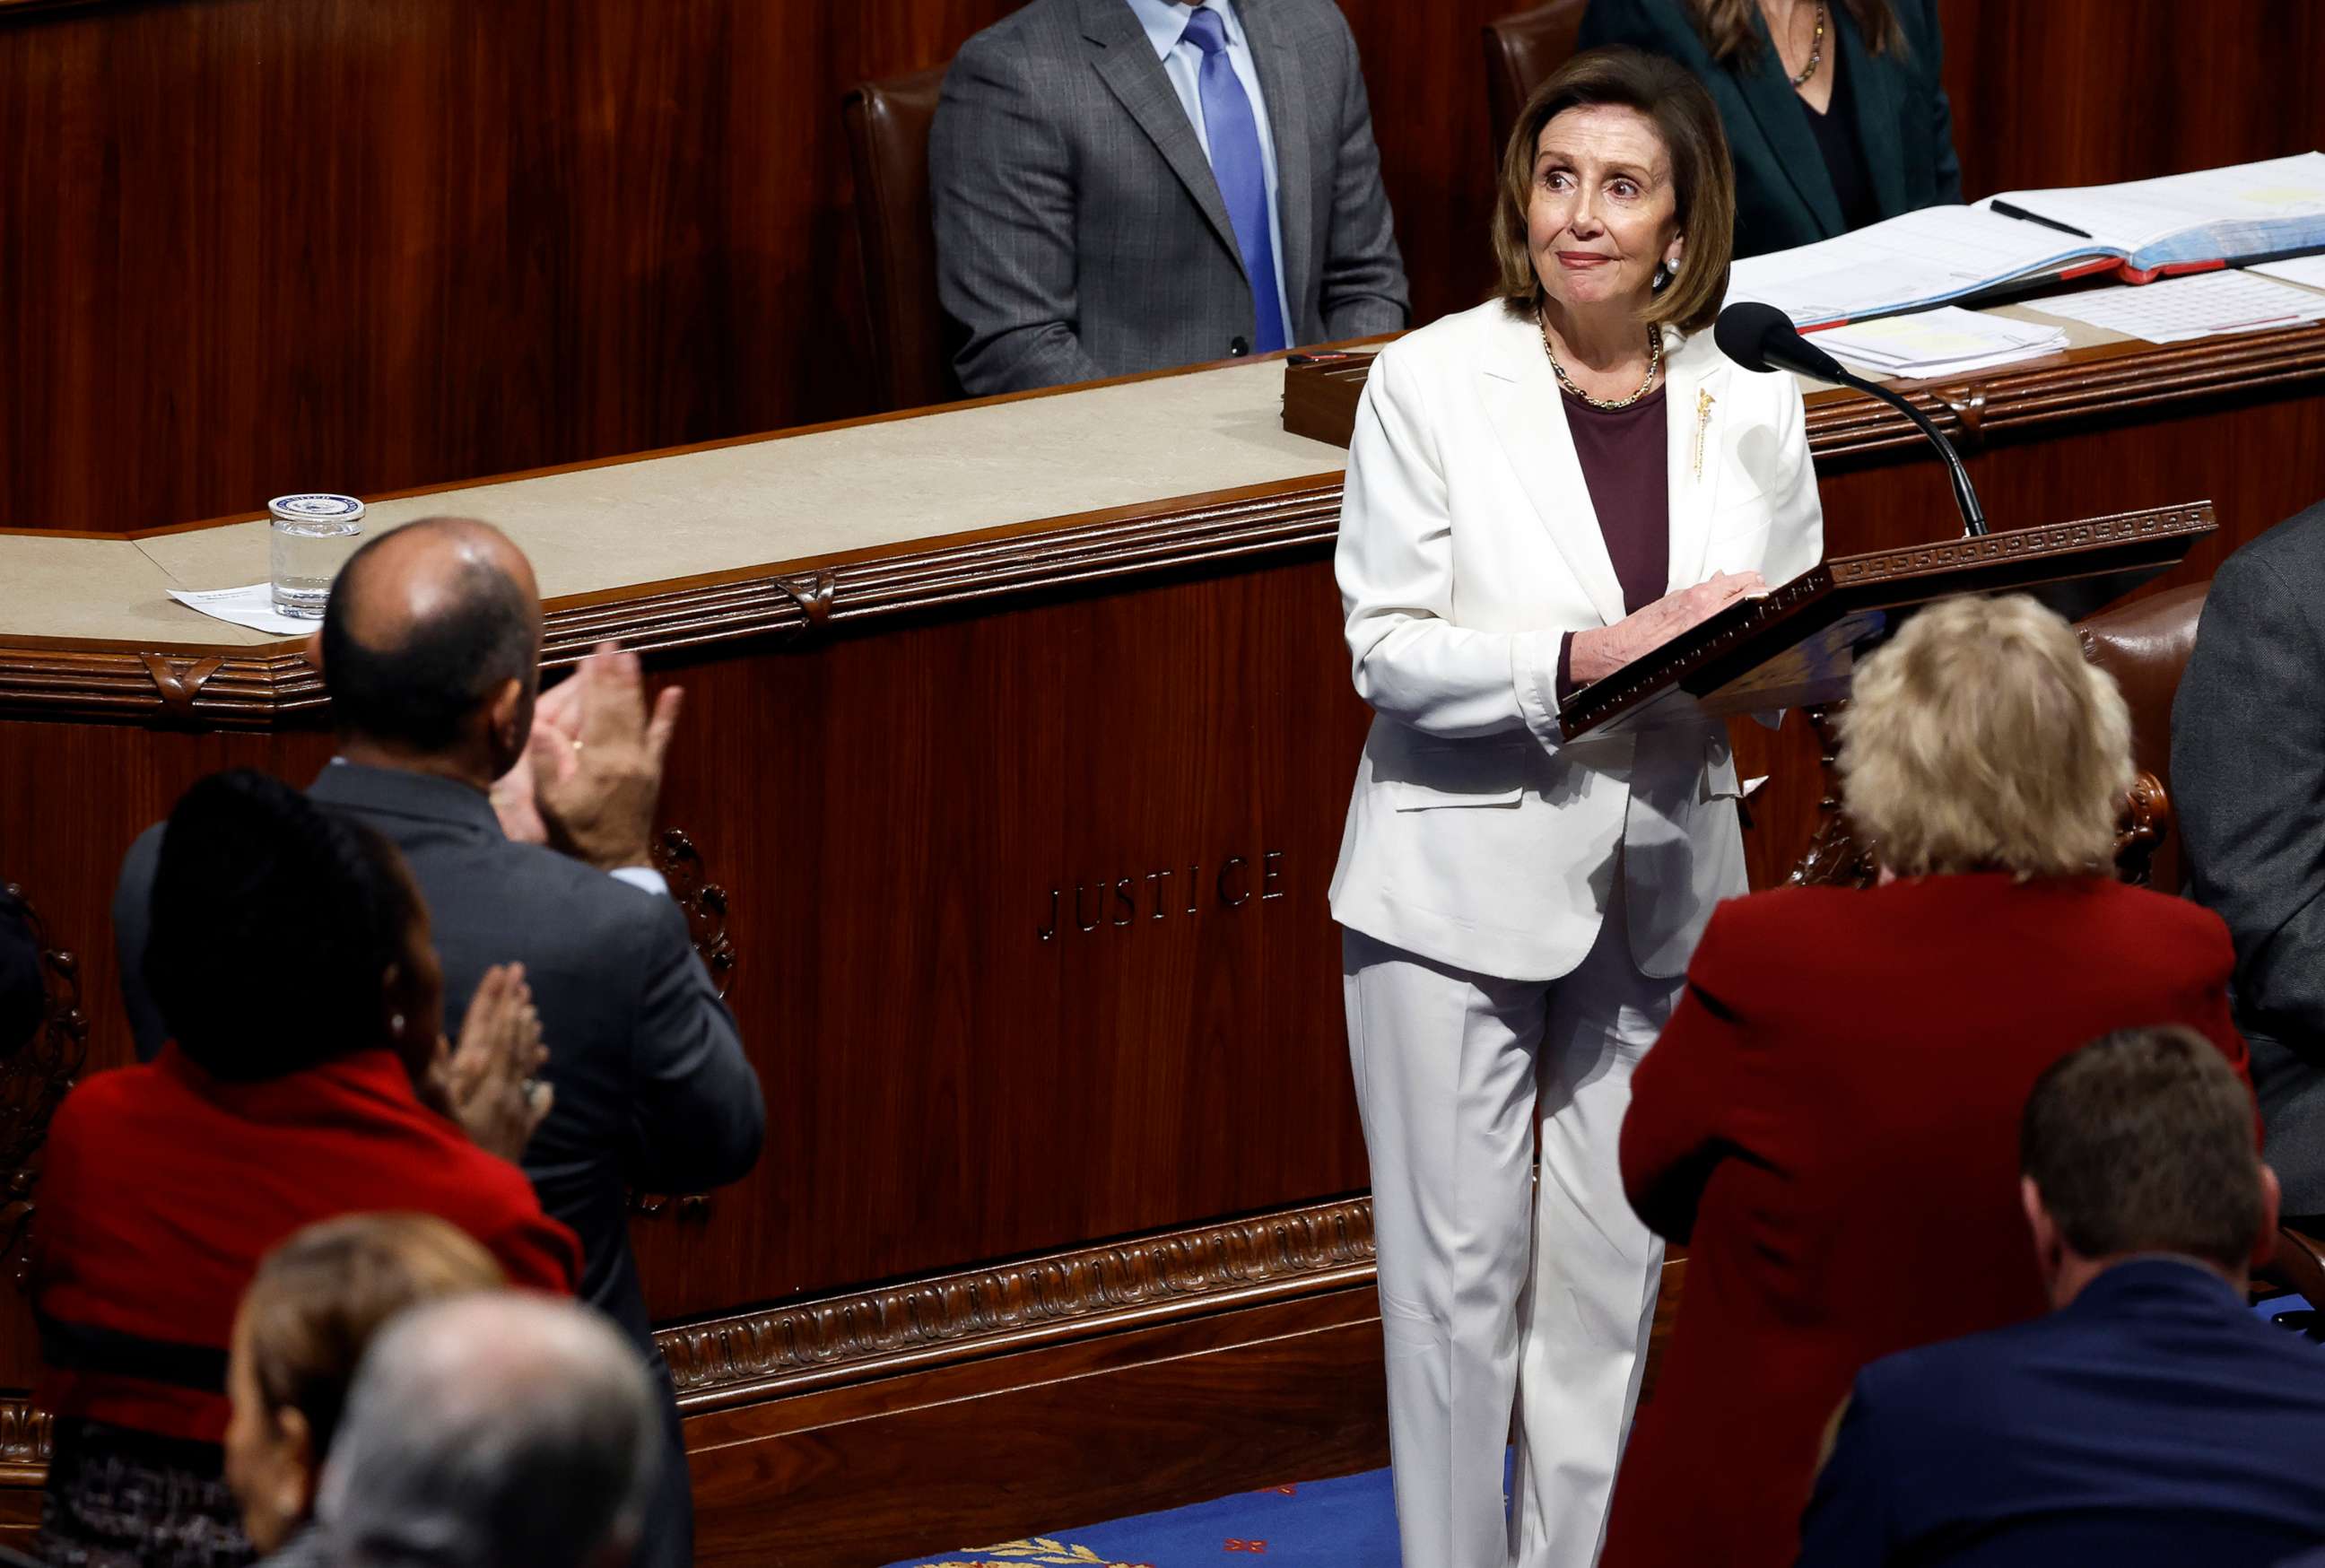 PHOTO: Speaker of the House Nancy Pelosi delivers remarks from the House Chambers of the Capitol Building, Nov. 17, 2022.